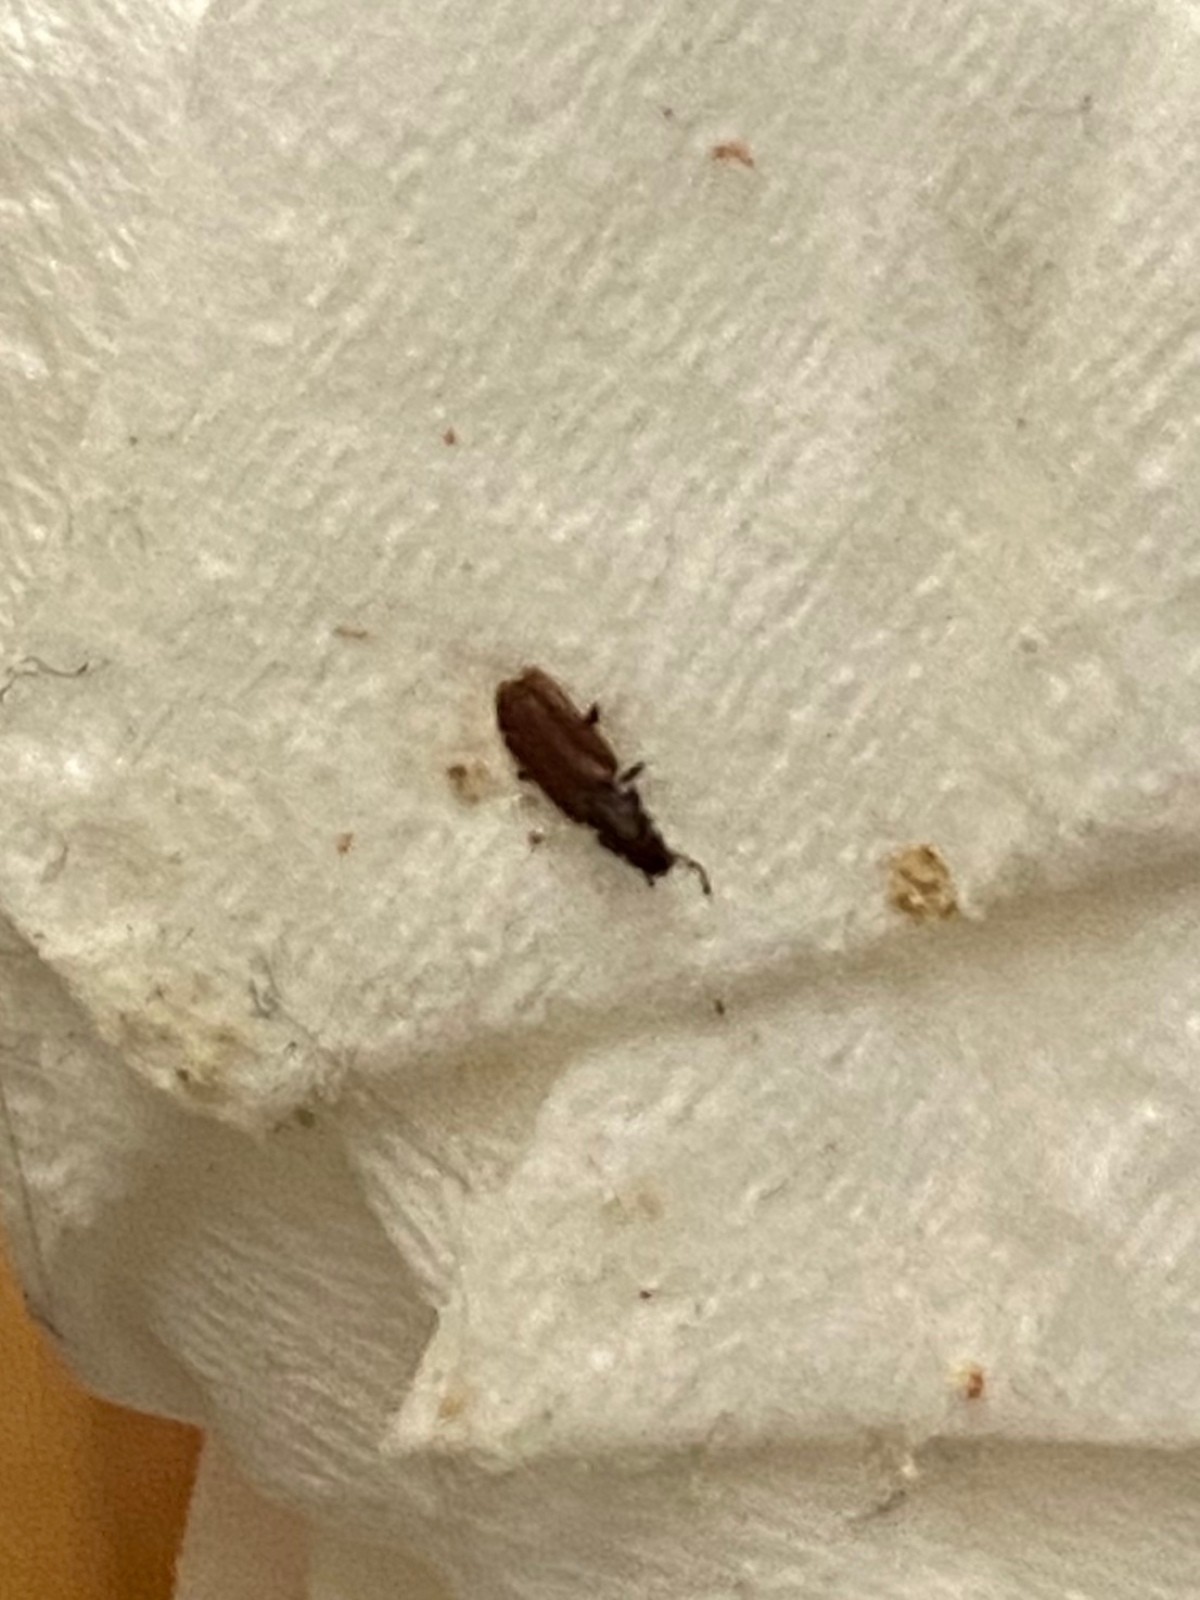 Identifying Small Brown Bugs with a Black Head? ThriftyFun